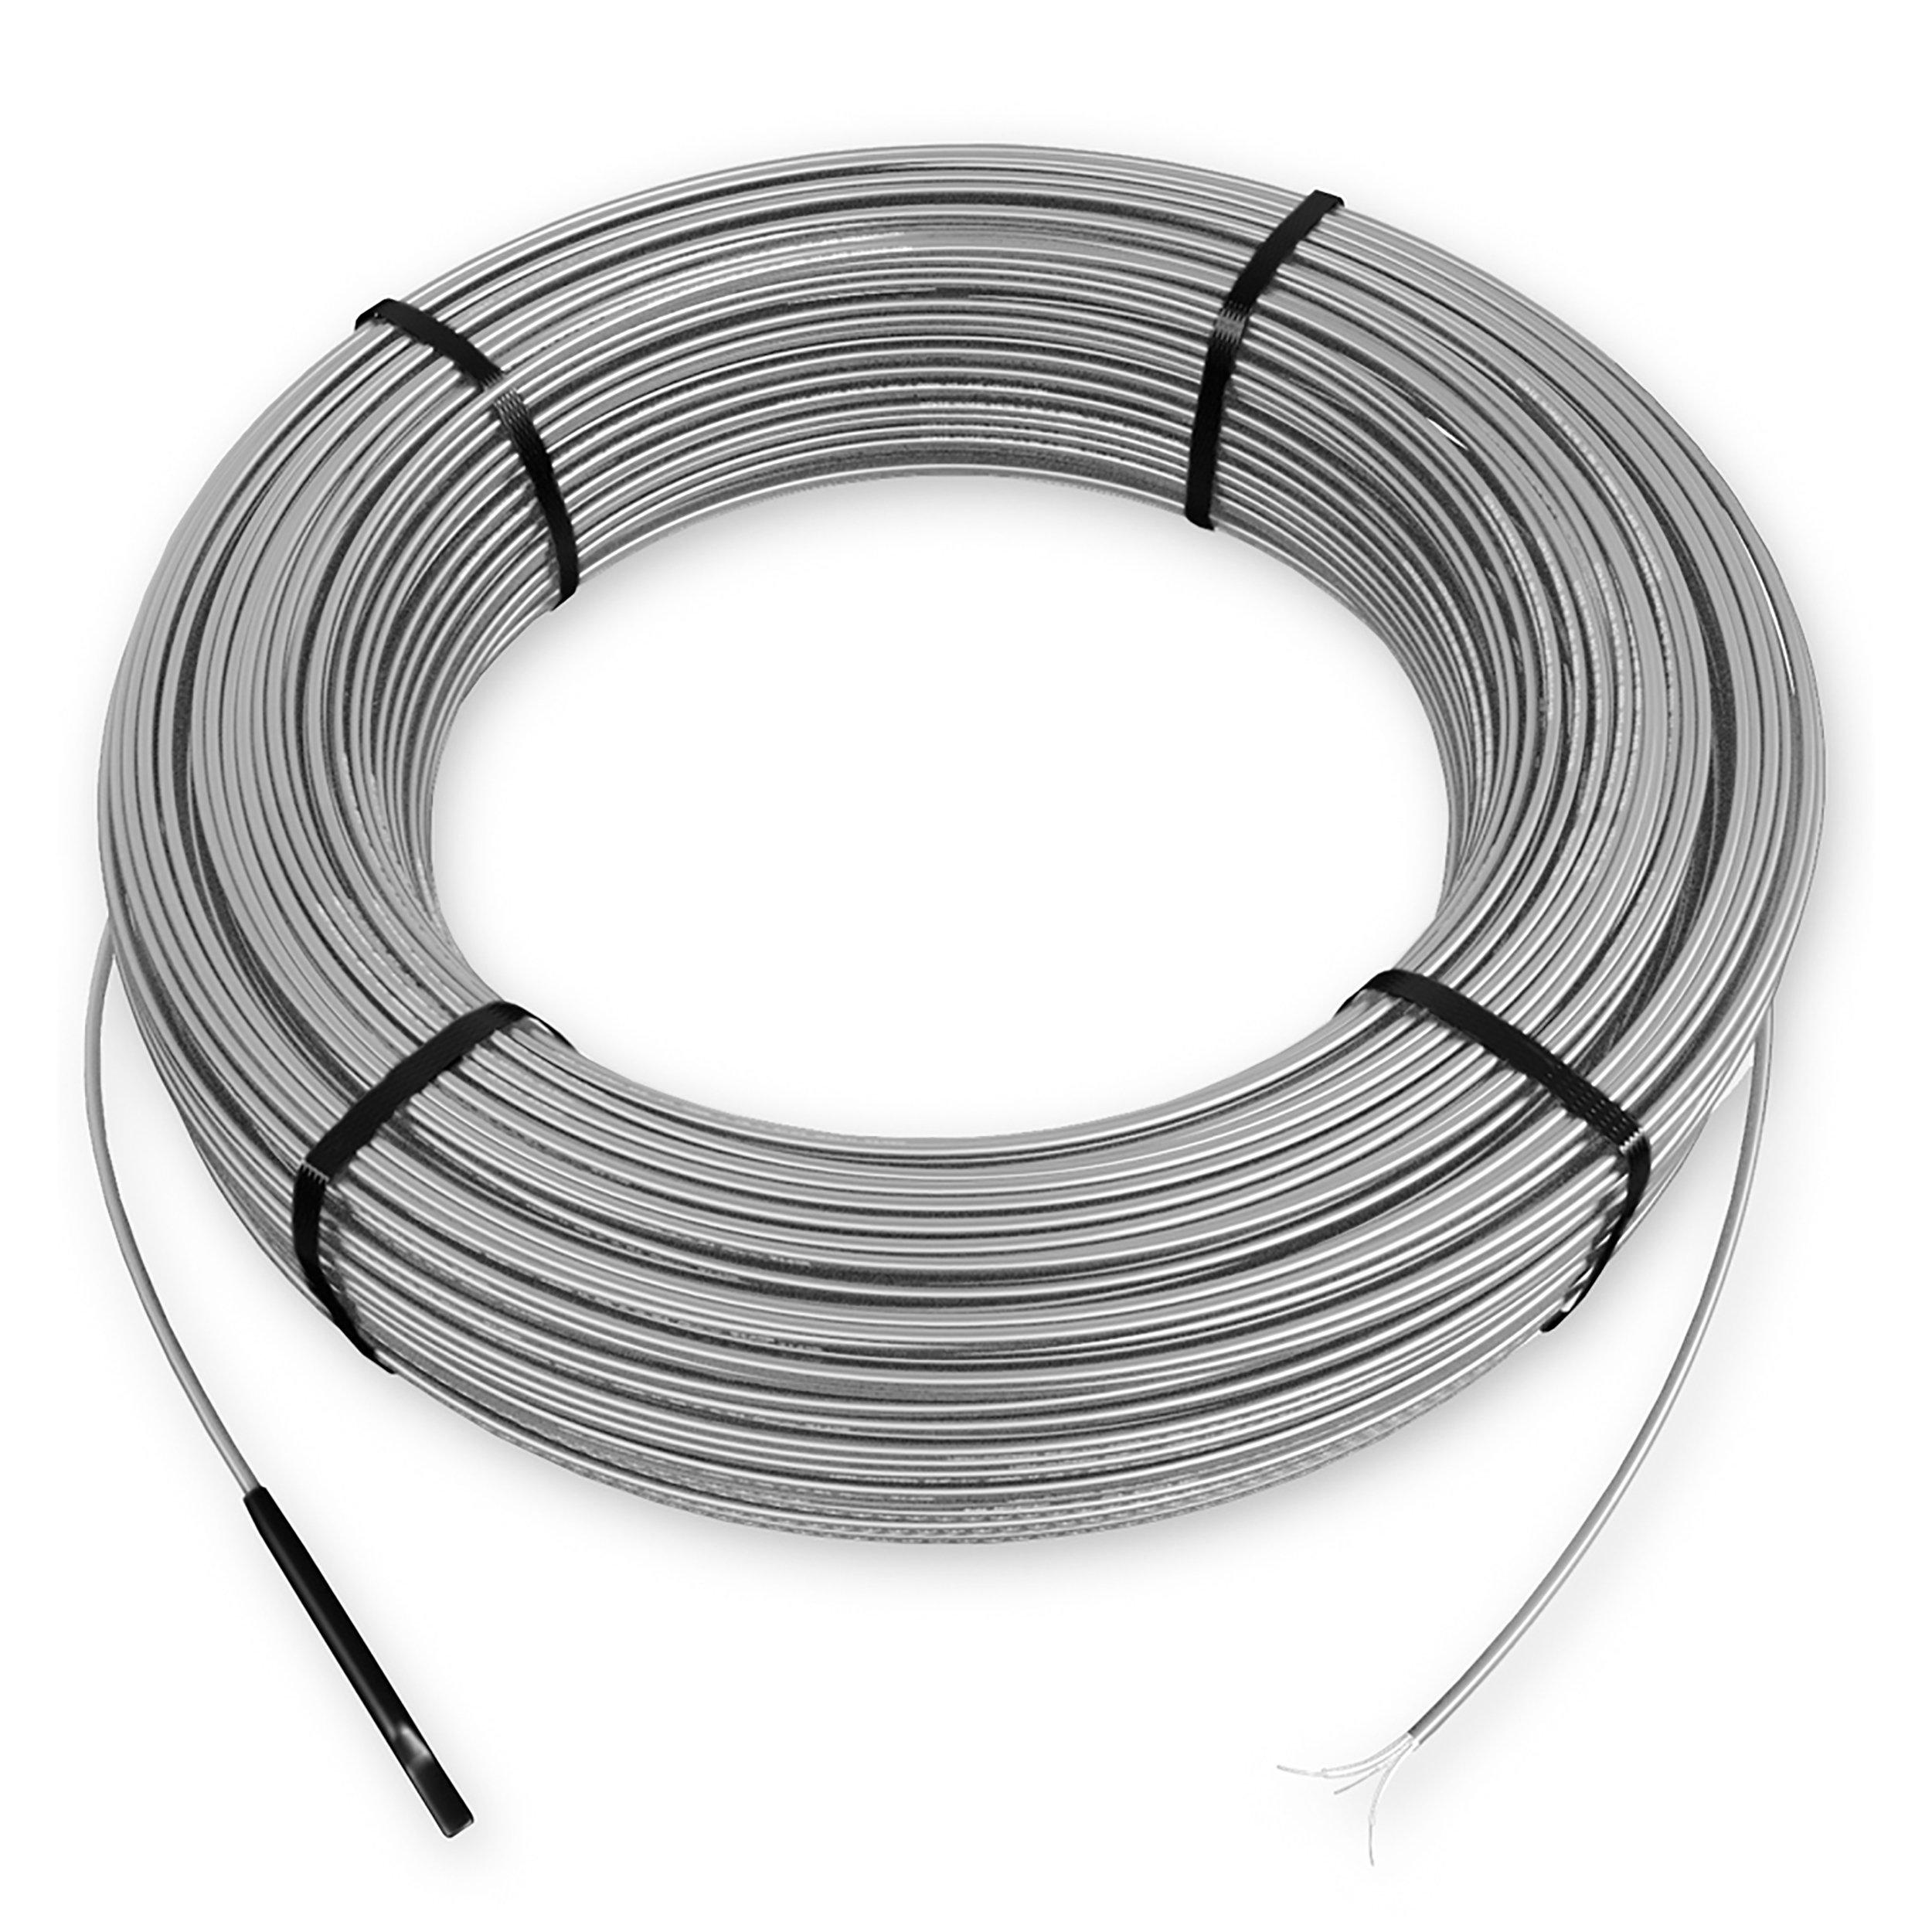 Schluter 51.4sqft. Ditra Heat 120V Heating Cable